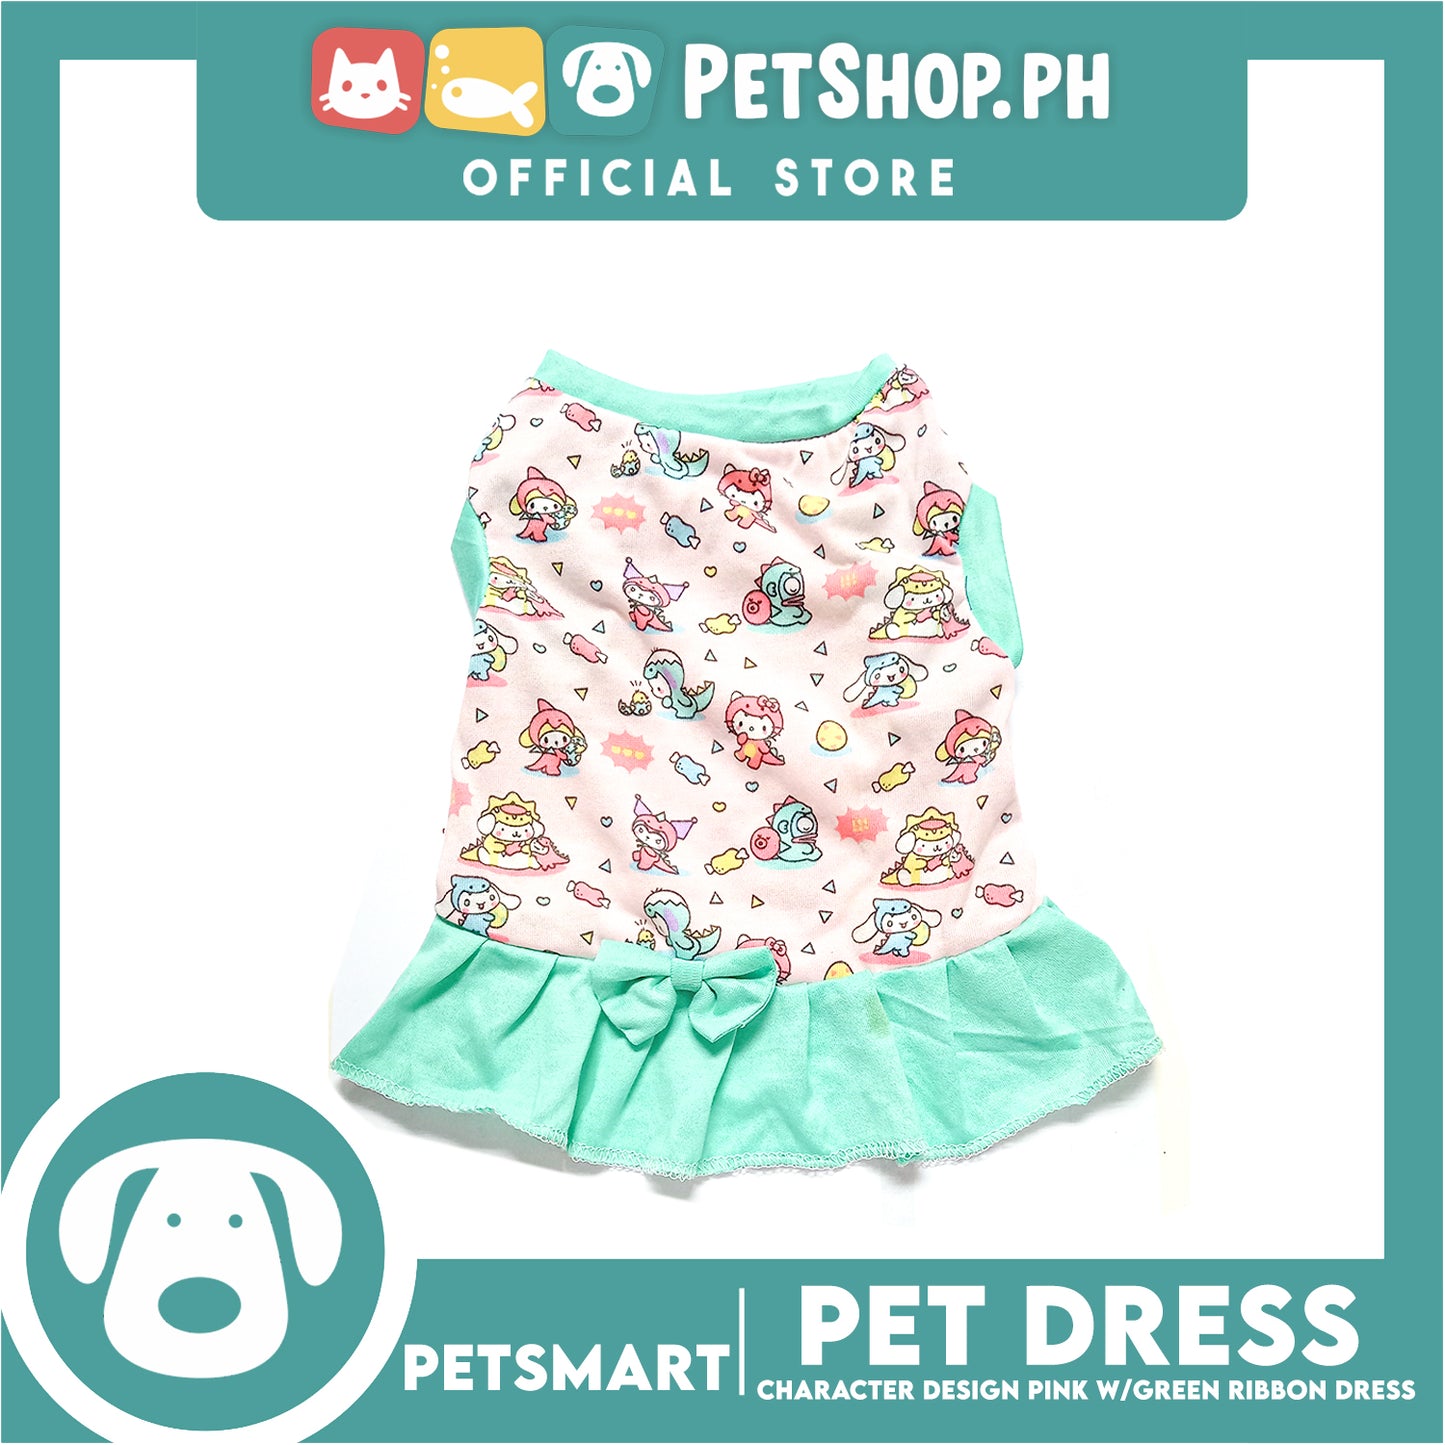 Pet Dress With Character Design Pink With Green Ribbon Dress DG-CTN119S (Small) Perfect Fit For Dogs And Cats, Pet Dress Clothes, Soft and Comfortable Pet Clothing